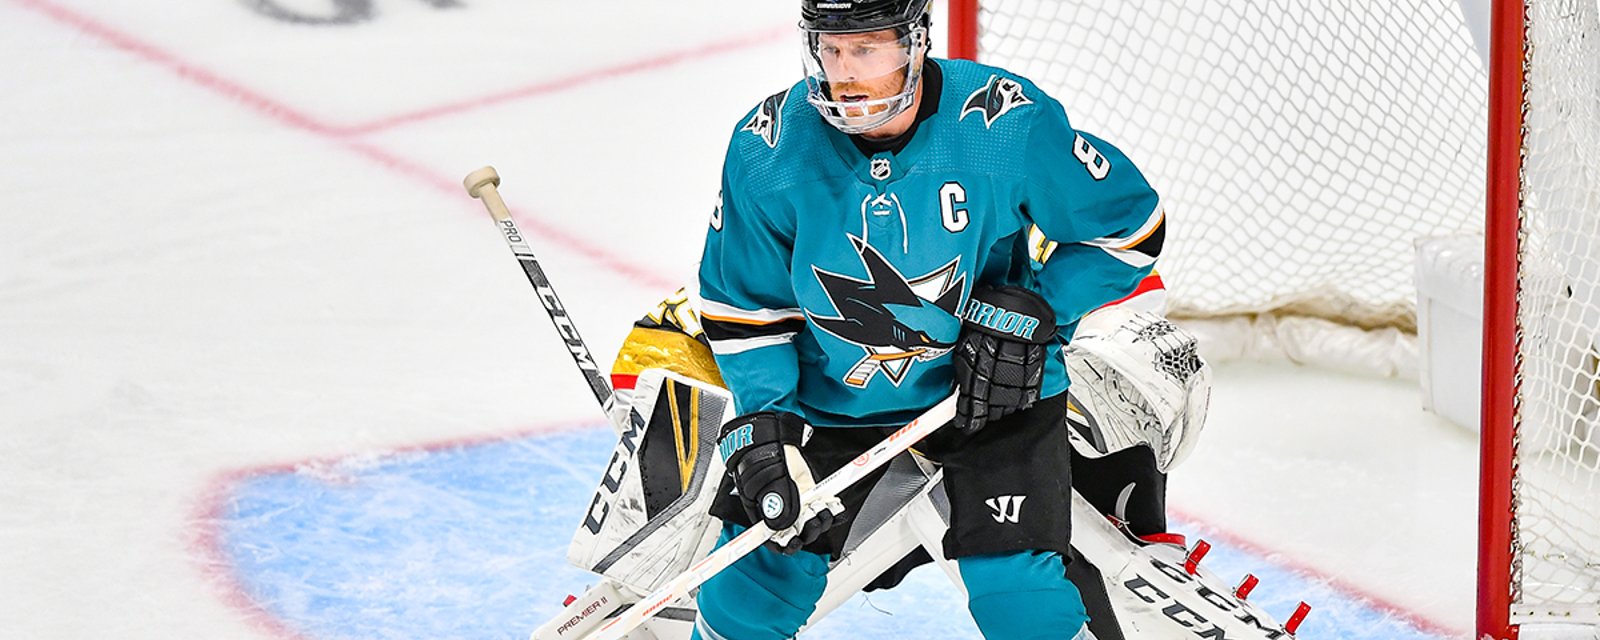 Report: Pavelski linked to Western Conference rival in free agent talks